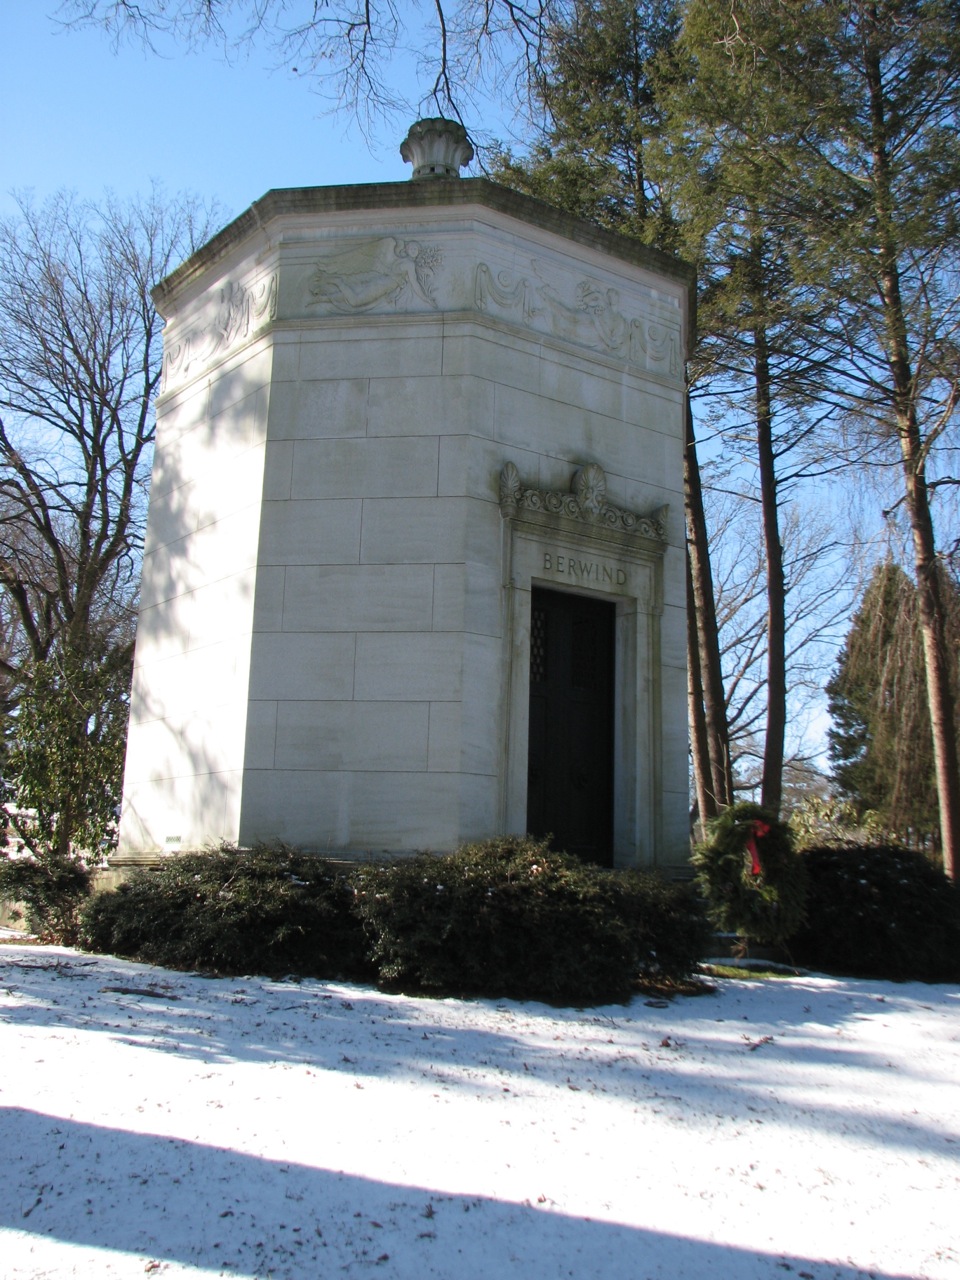 The octagonal Classical Revival mausoleum designed for the Berwind family. 